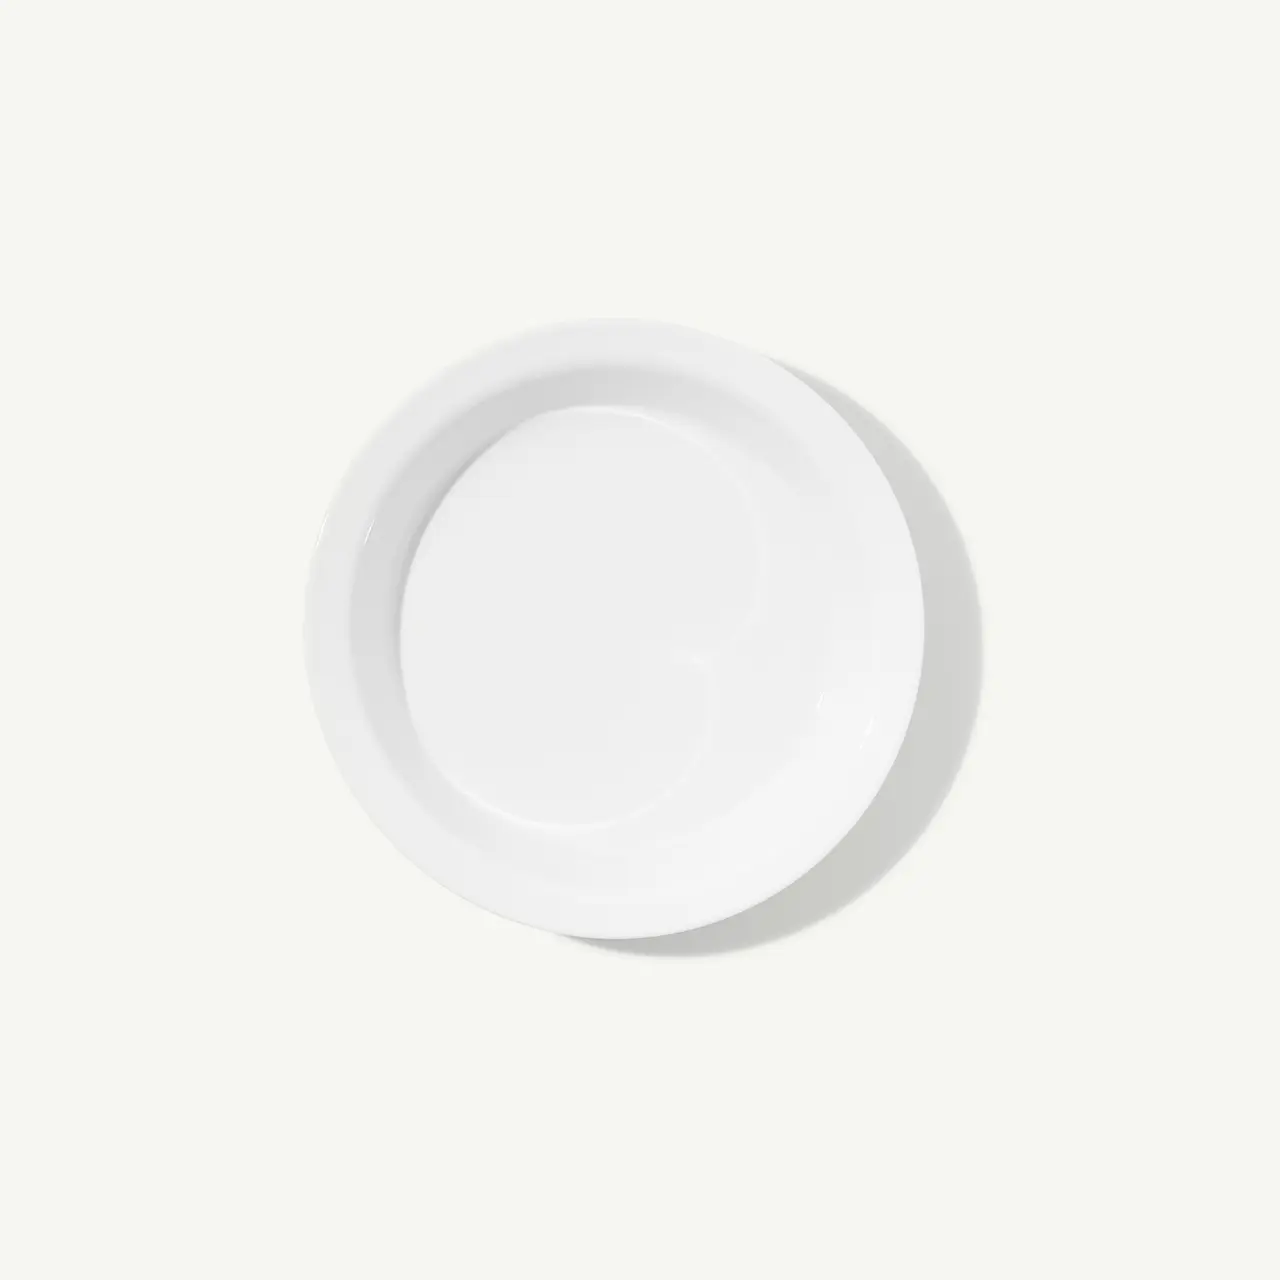 A plain white plate is centered on a light background.